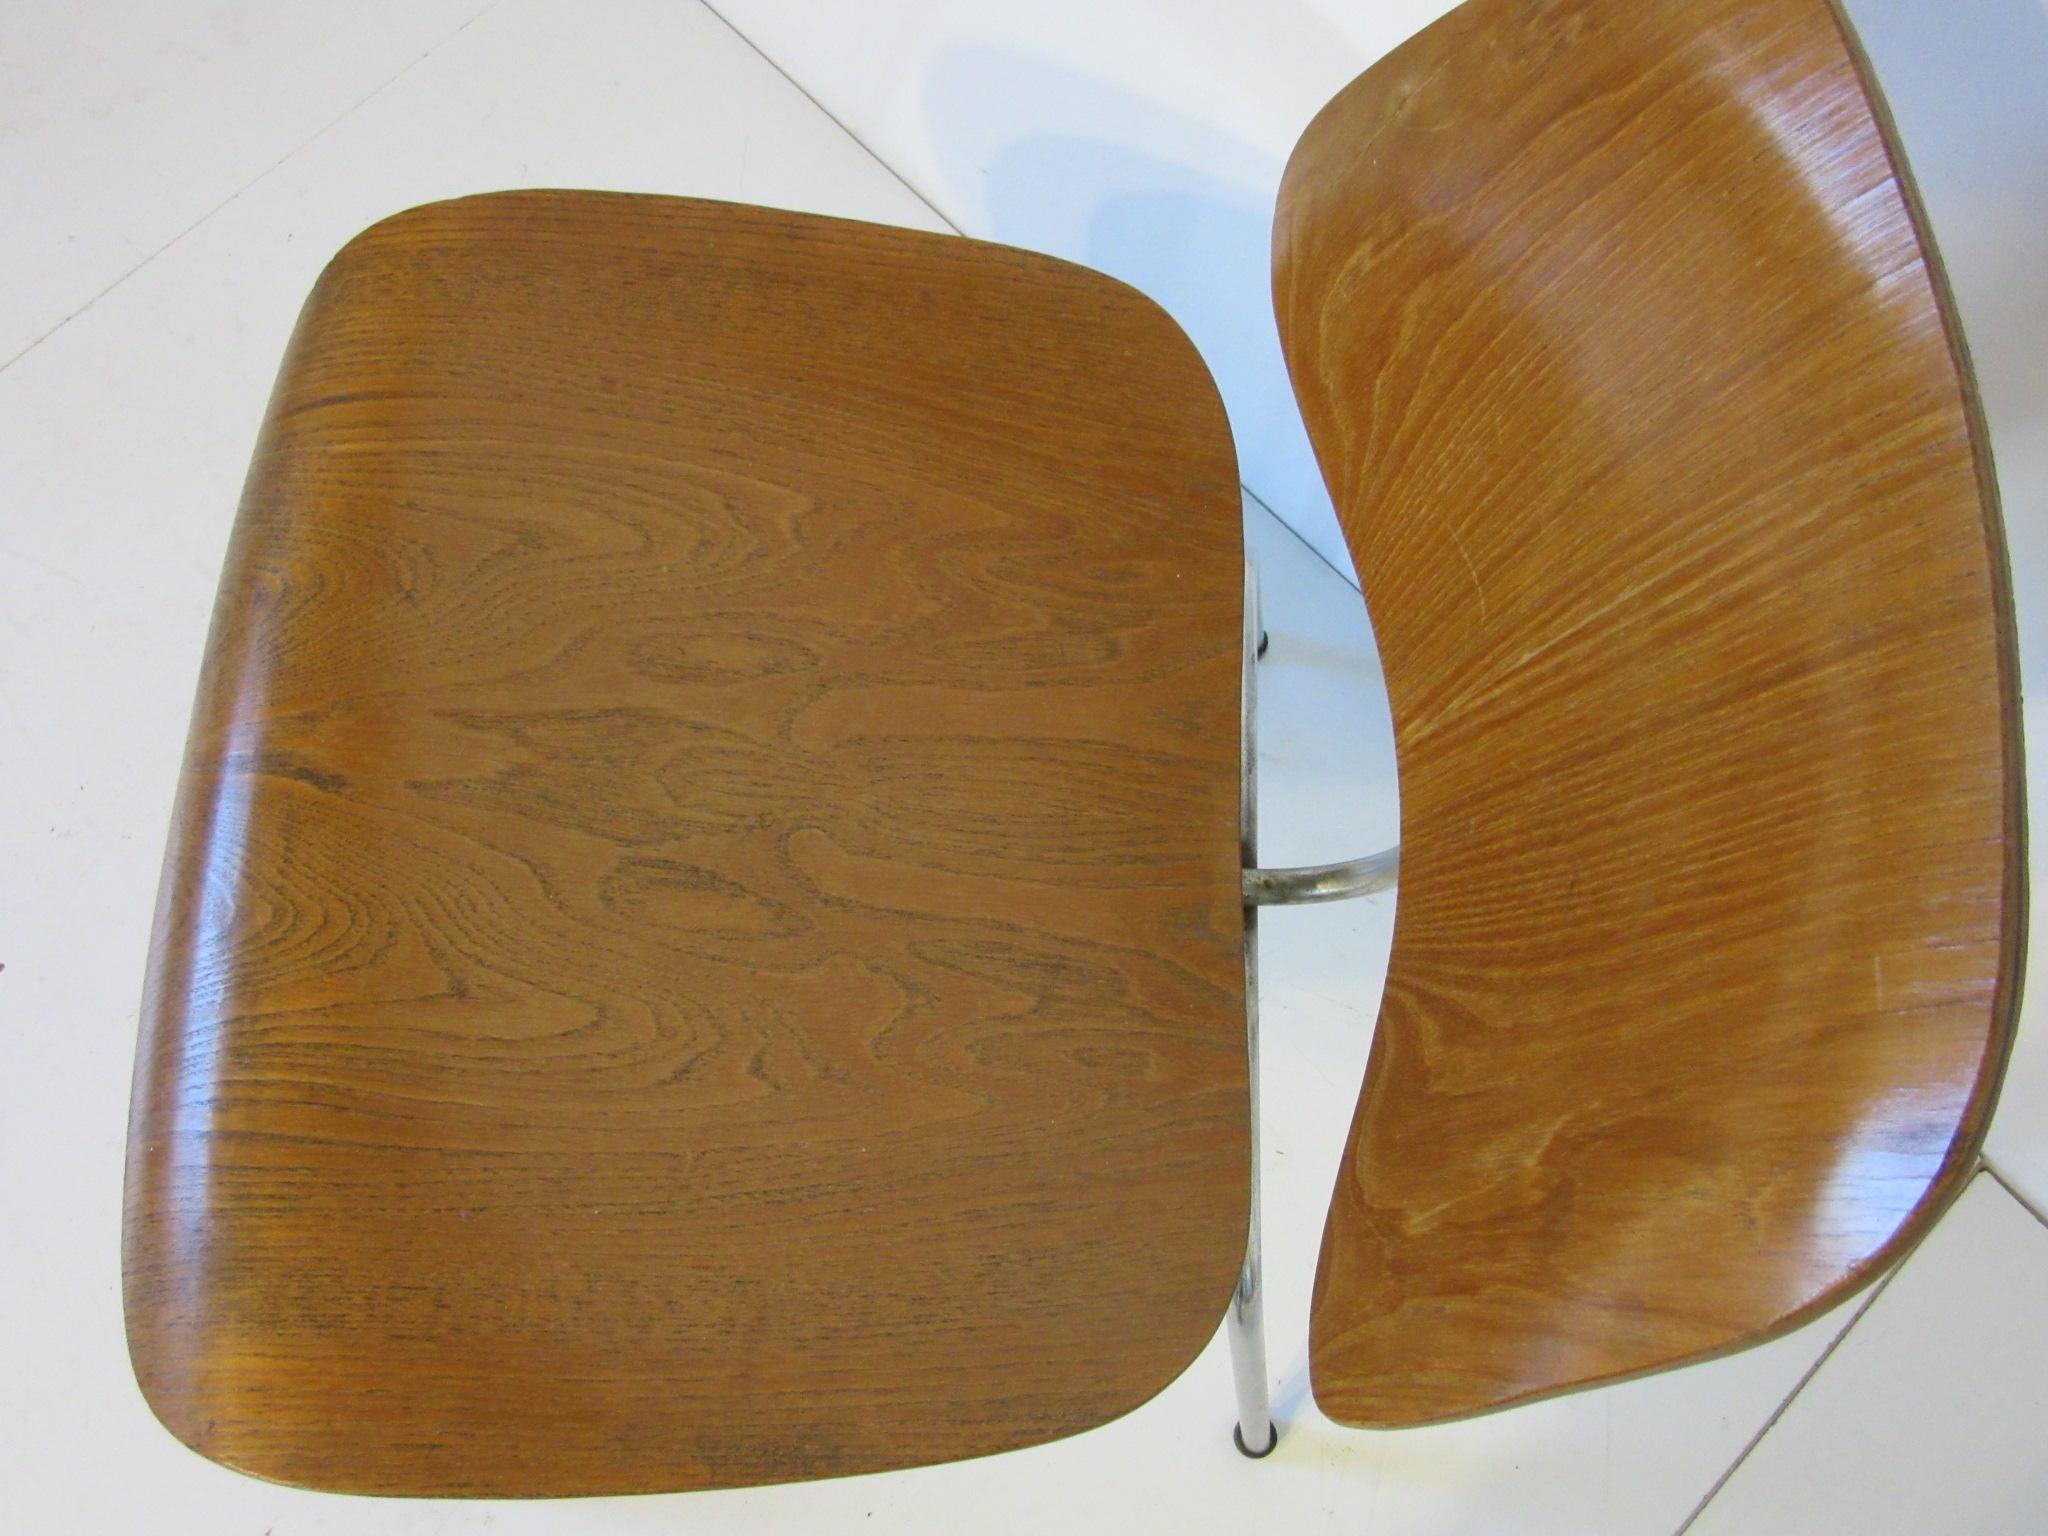 An early production oak bent plywood side chair with plated frame, domed feet and underside clamp styled base construction. Retains factory ink stamp date to the bottom 12- 1951 manufactured by the Herman Miller Furniture Company.